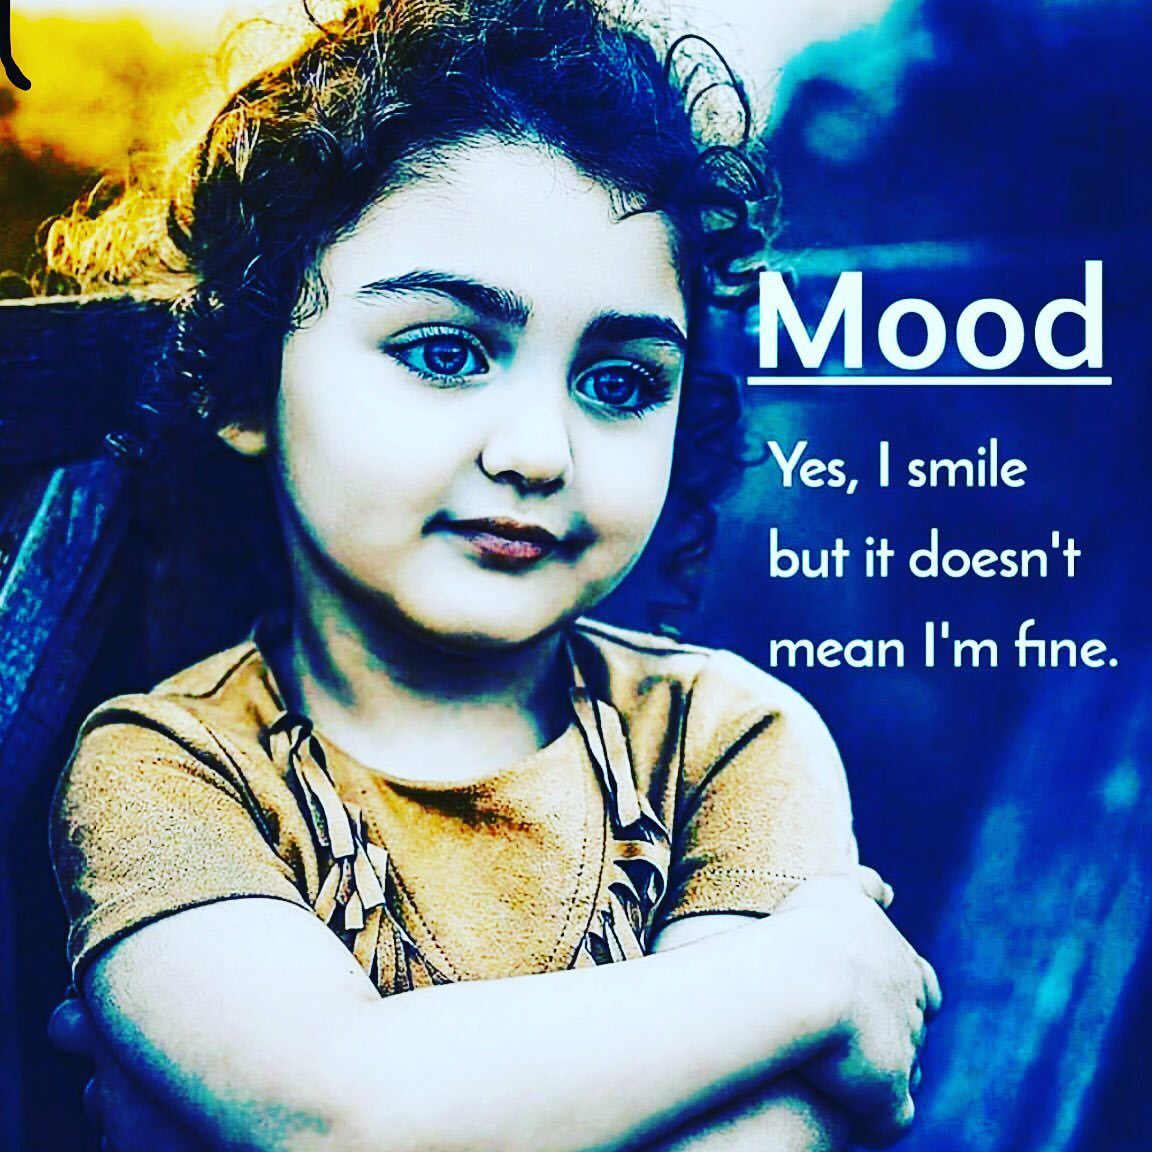 Mood. Yes, I smile but it doesn't mean I'm fine. - Phrases